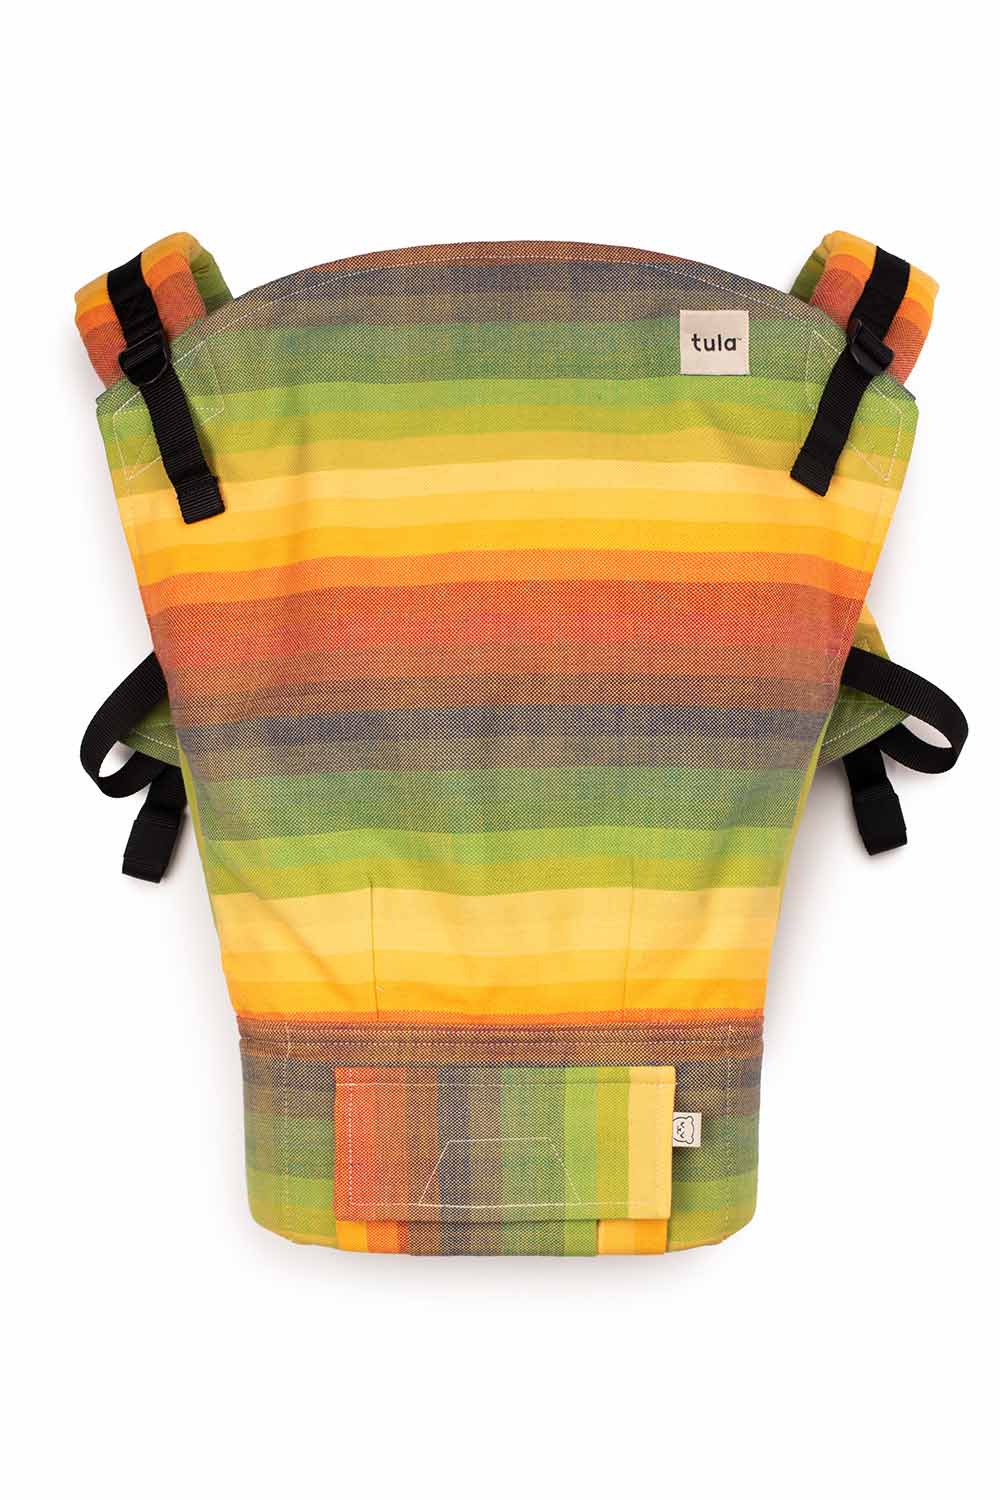 I Missed You - Signature Handwoven Toddler Carrier